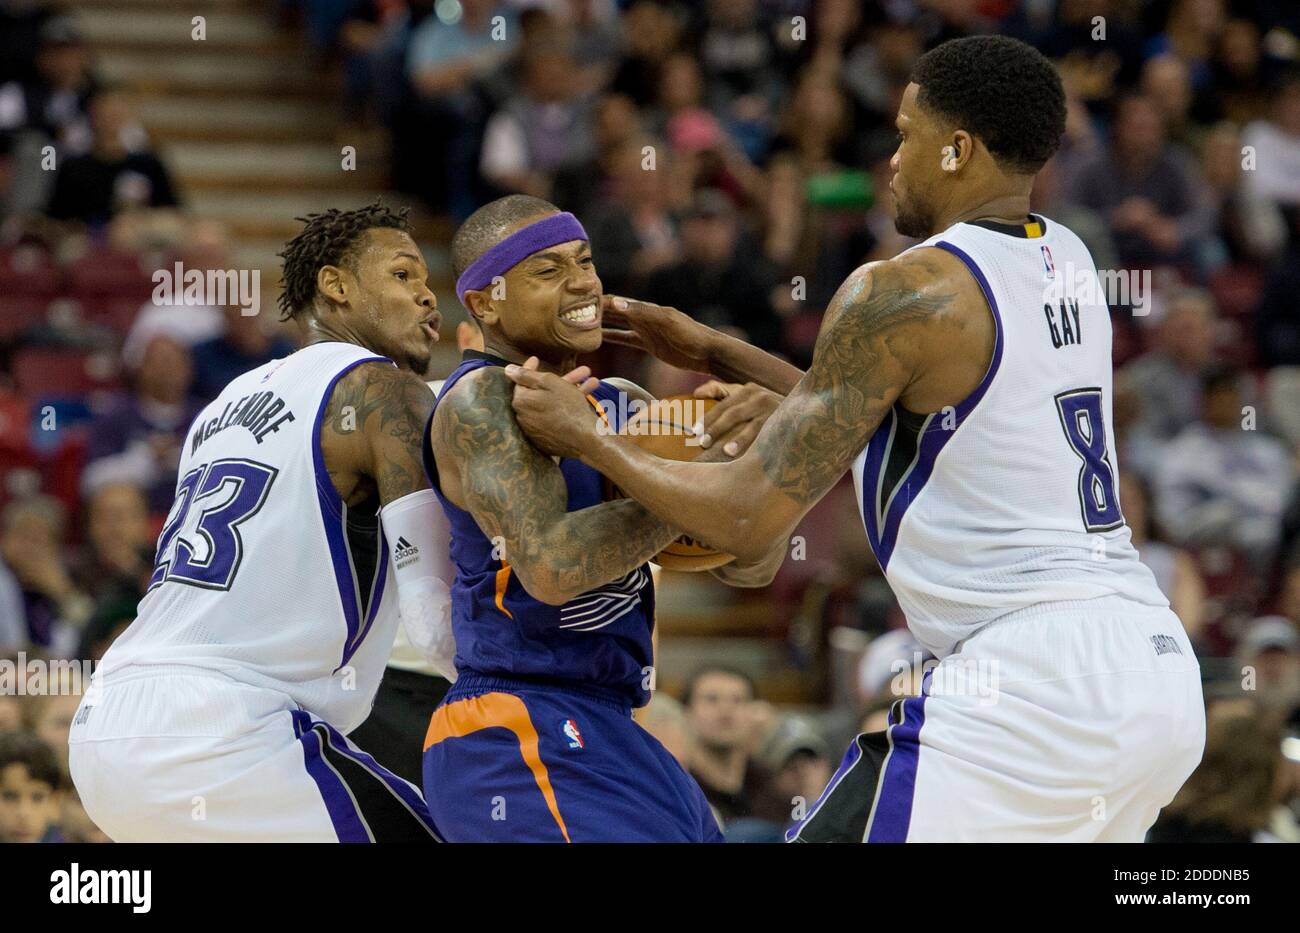 NO FILM, NO VIDEO, NO TV, NO DOCUMENTARY - The Phoenix Suns' Isaiah Thomas is double-teamed by the Sacramento Kings' Rudy Gay (8) and Ben McLemore, left, in the fourth quarter at Sleep Train Arena in Sacramento, CA, USA, on Friday, December 26, 2014. Photo by Jose Luis Villegas/Sacramento Bee/TNS/ABACAPRESS.COM Stock Photo